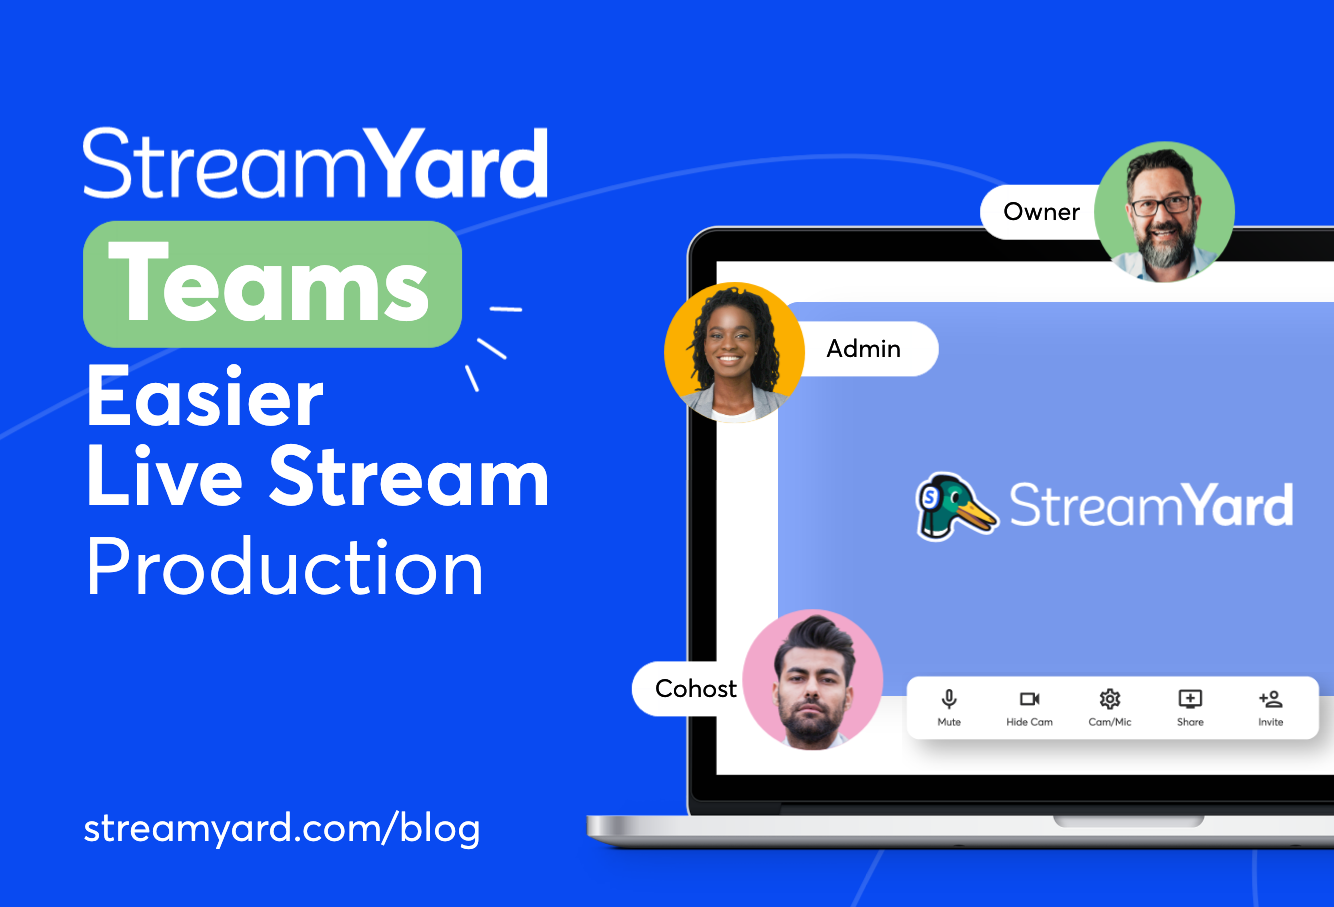 StreamYard Teams, For Easier Live Stream Production